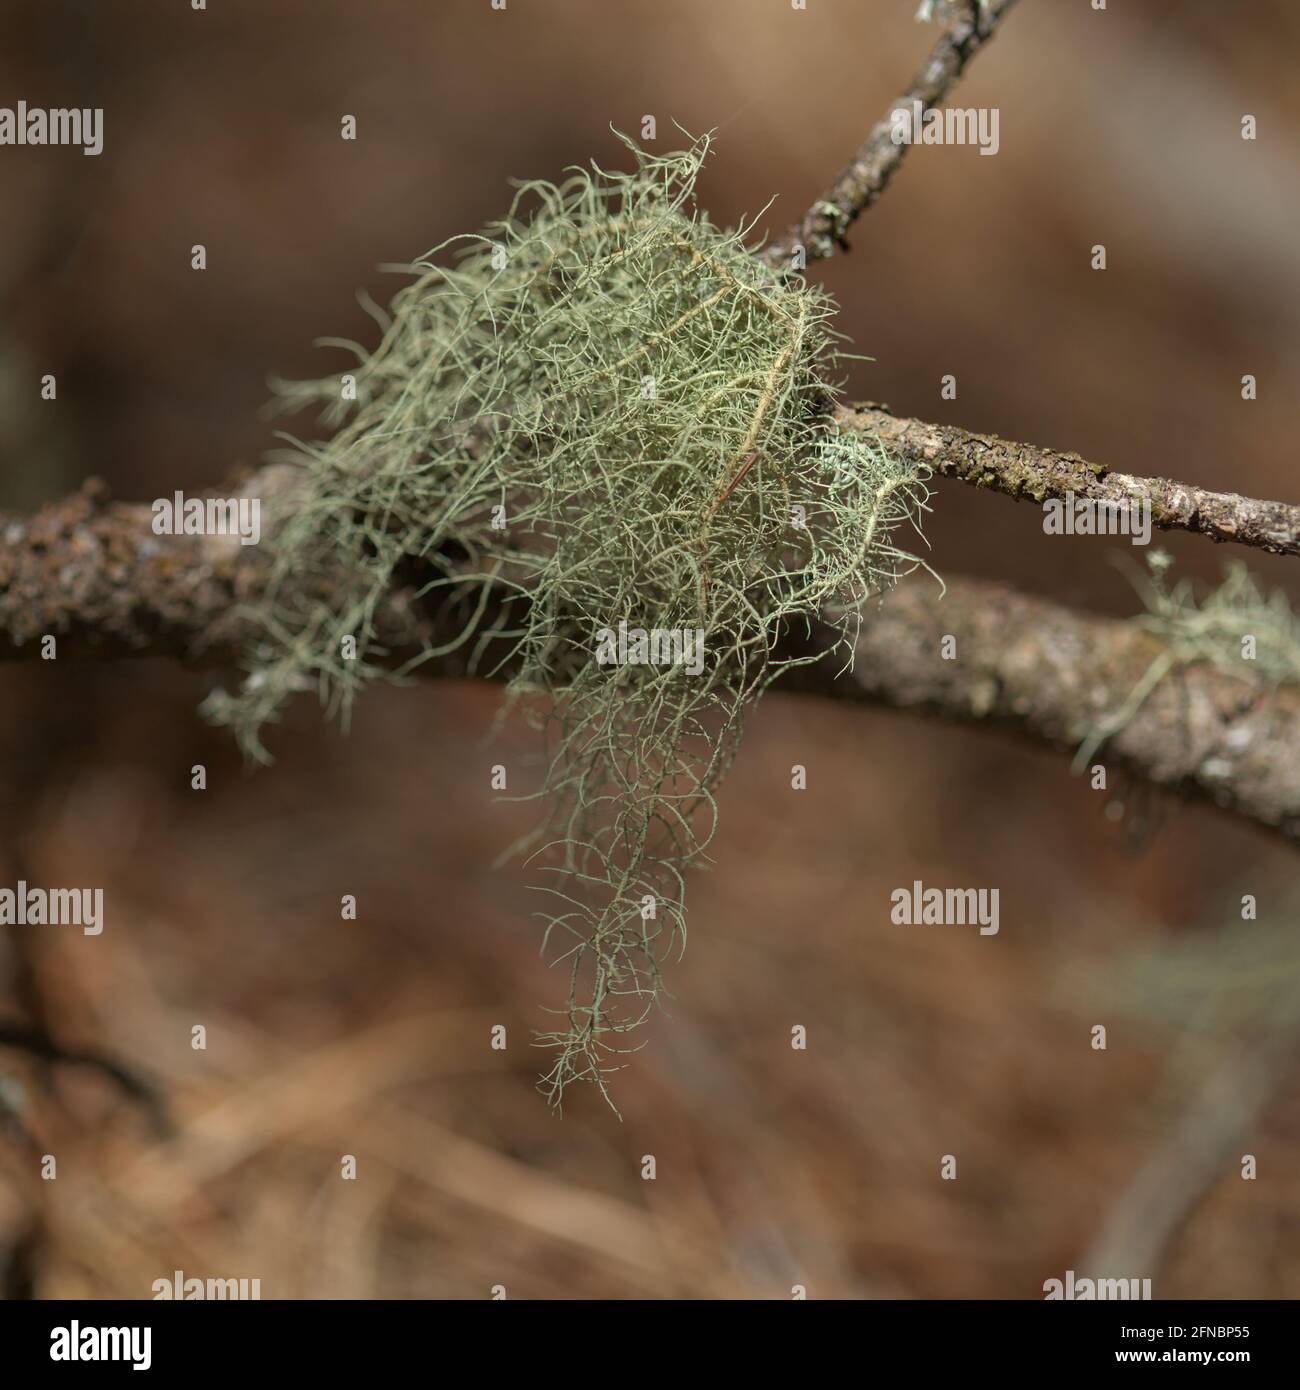 Abandoned garden in humid area, tree lichen-covered trunk, natural macro floral background Stock Photo